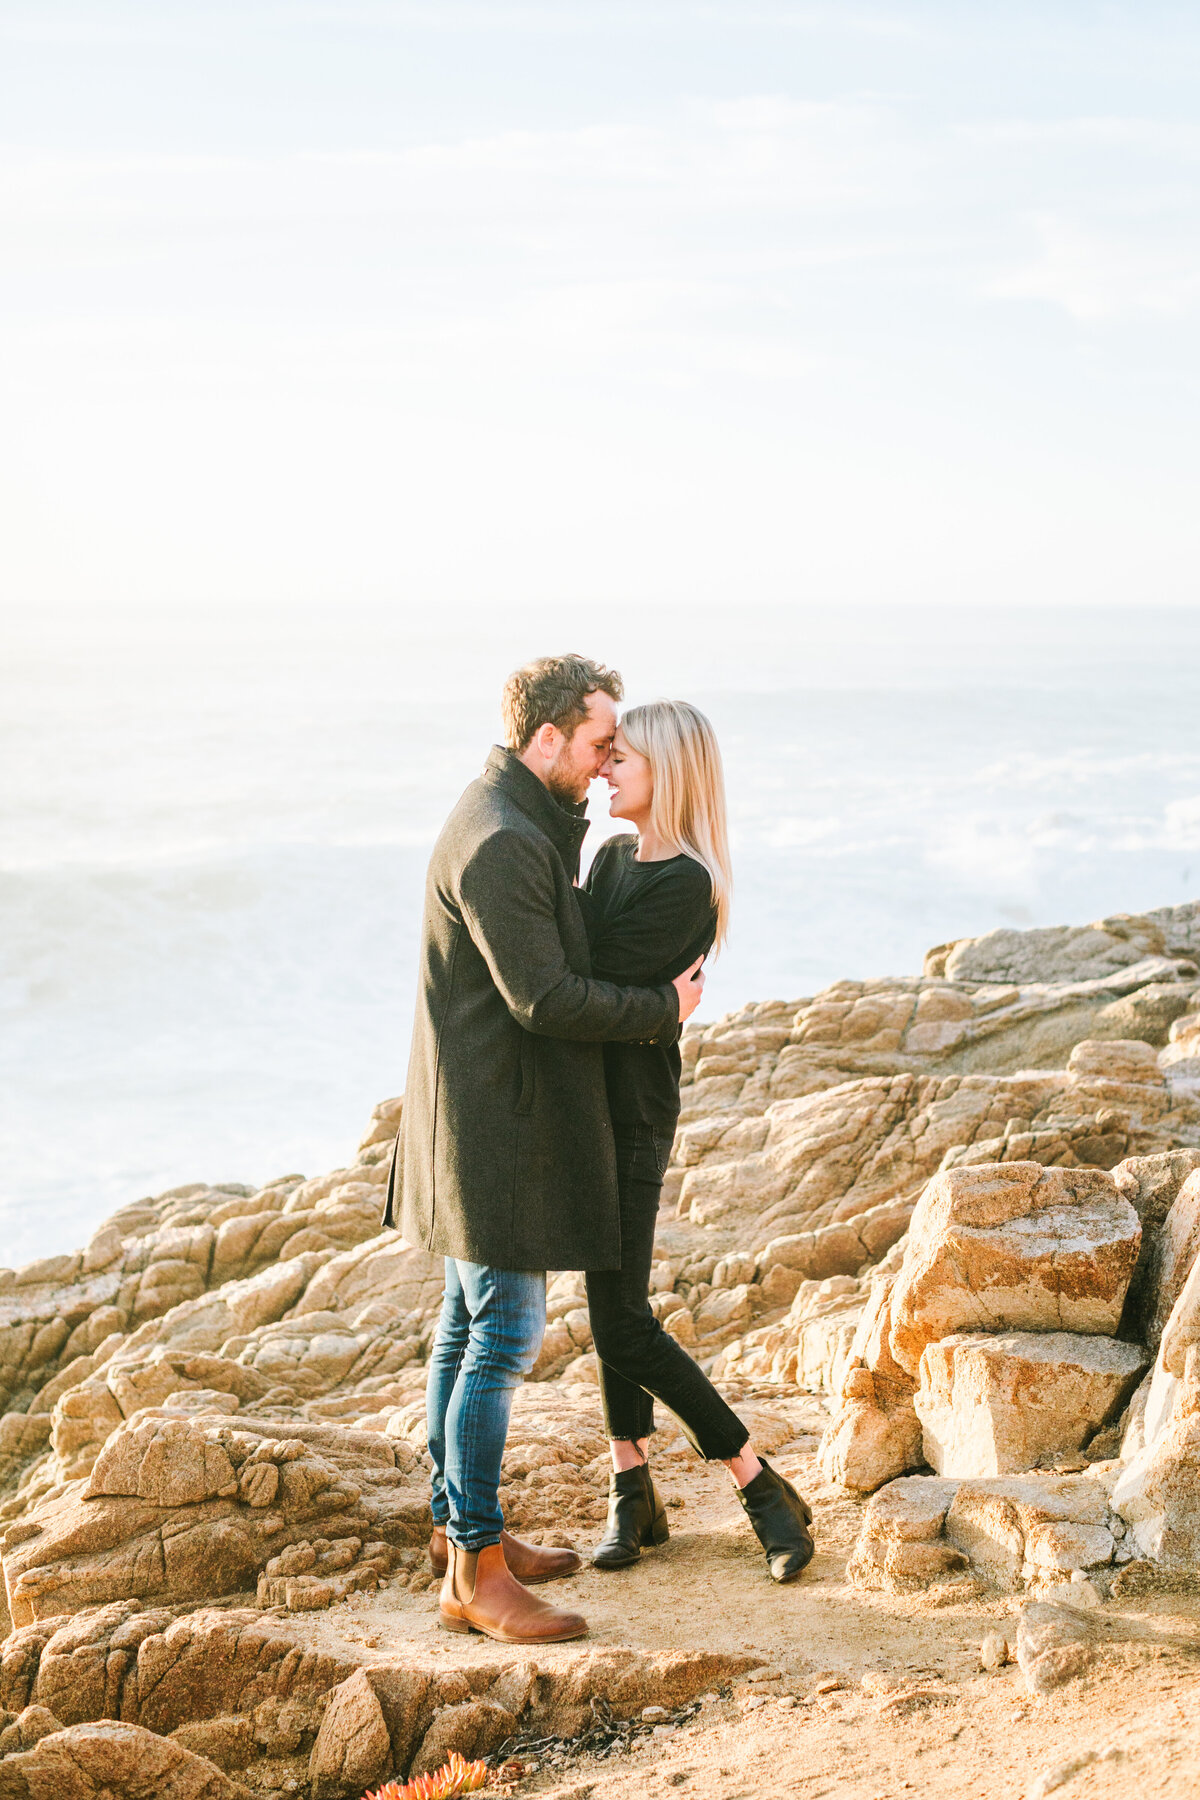 Best California and Texas Engagement Photographer-Jodee Debes Photography-223